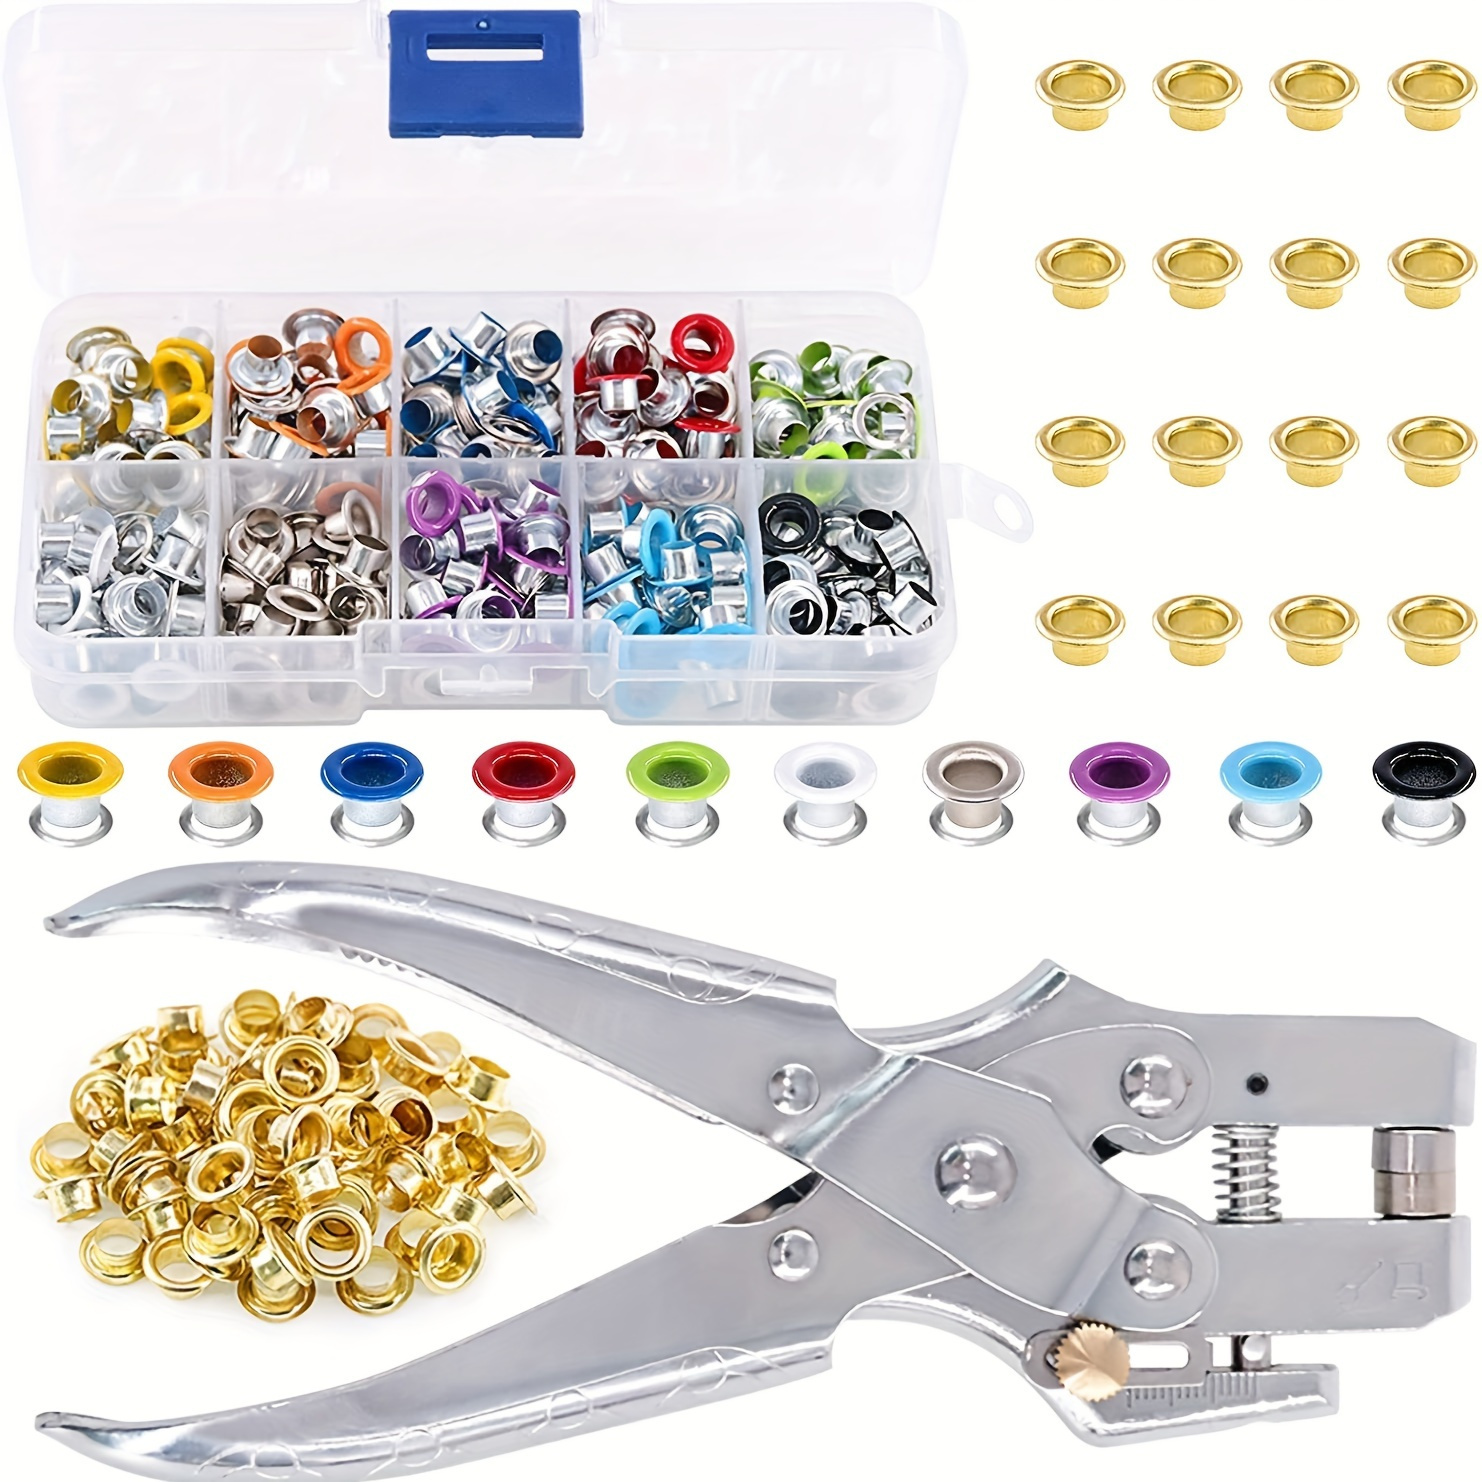 

401sets (11 Colors) 3/16 Inches Grommet Tool Kit Grommet Eyelet Plier Set Eyelet Hole Punch Pliers Grommet Hand Press Pliers With 300pcs Of Grommets Eyelets For Shoes Clothes Bags Craft Supplies